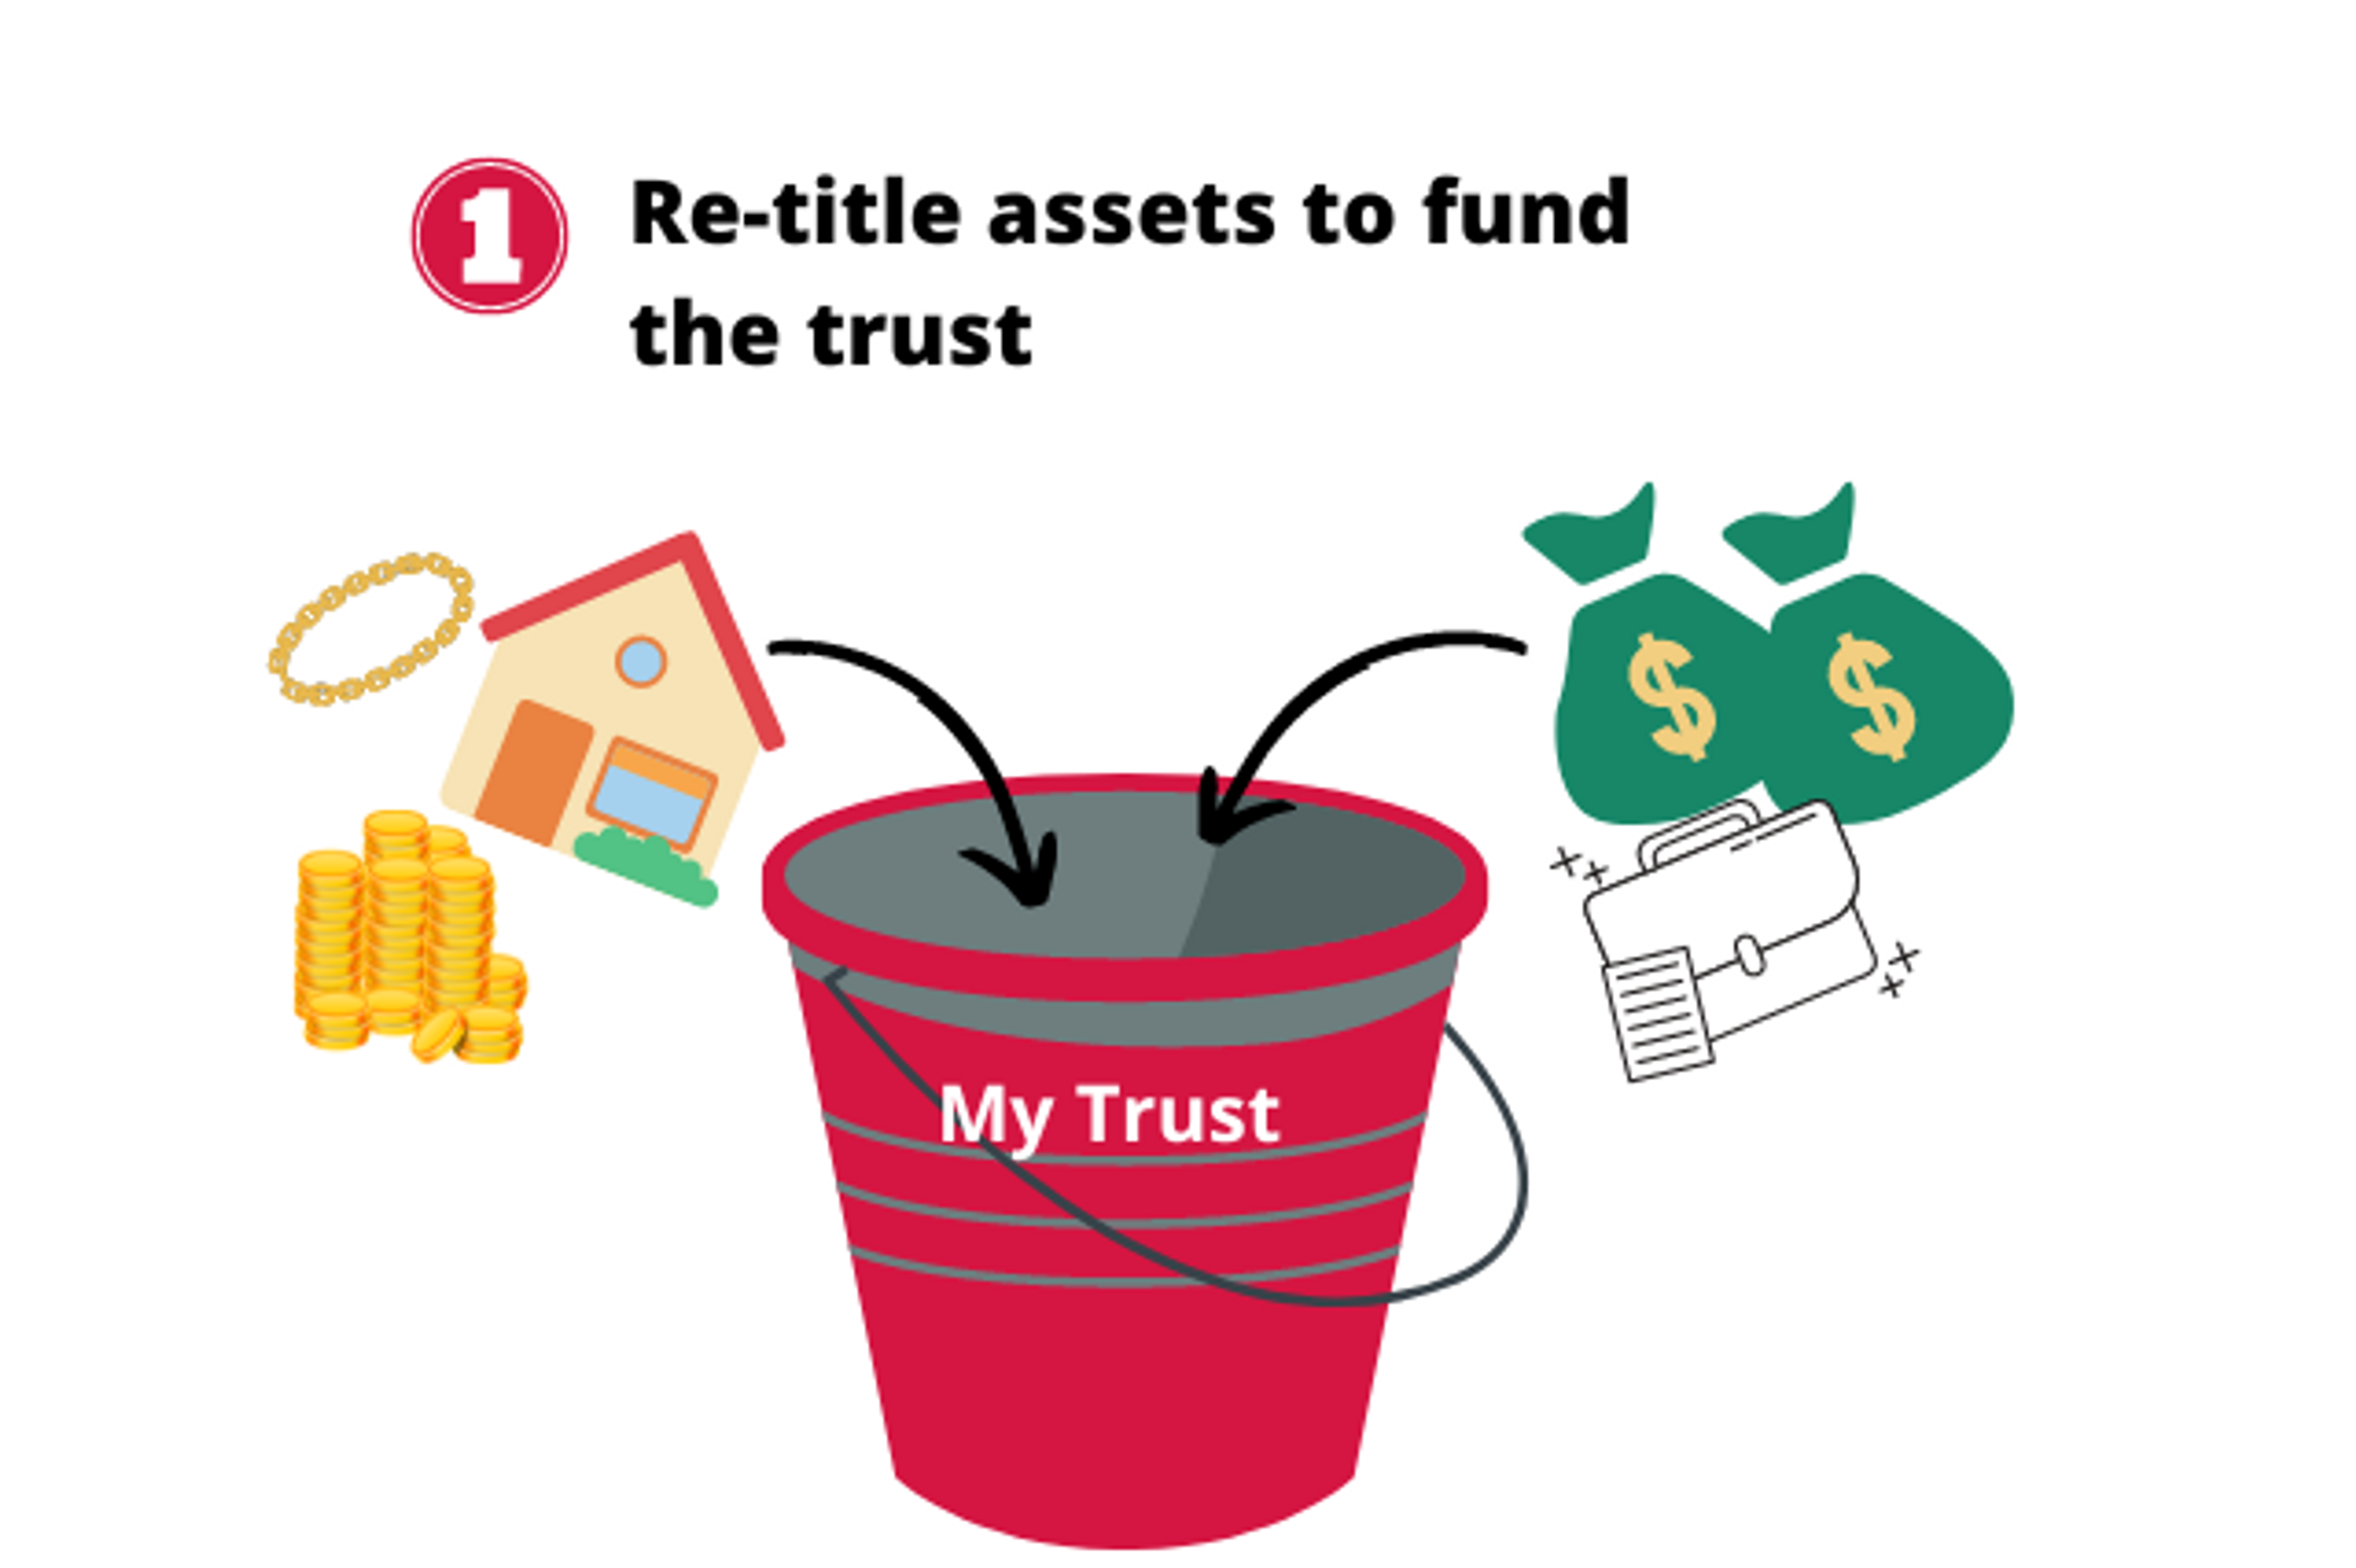 Step 1: Assets are re-titled and placed into the trust bucket